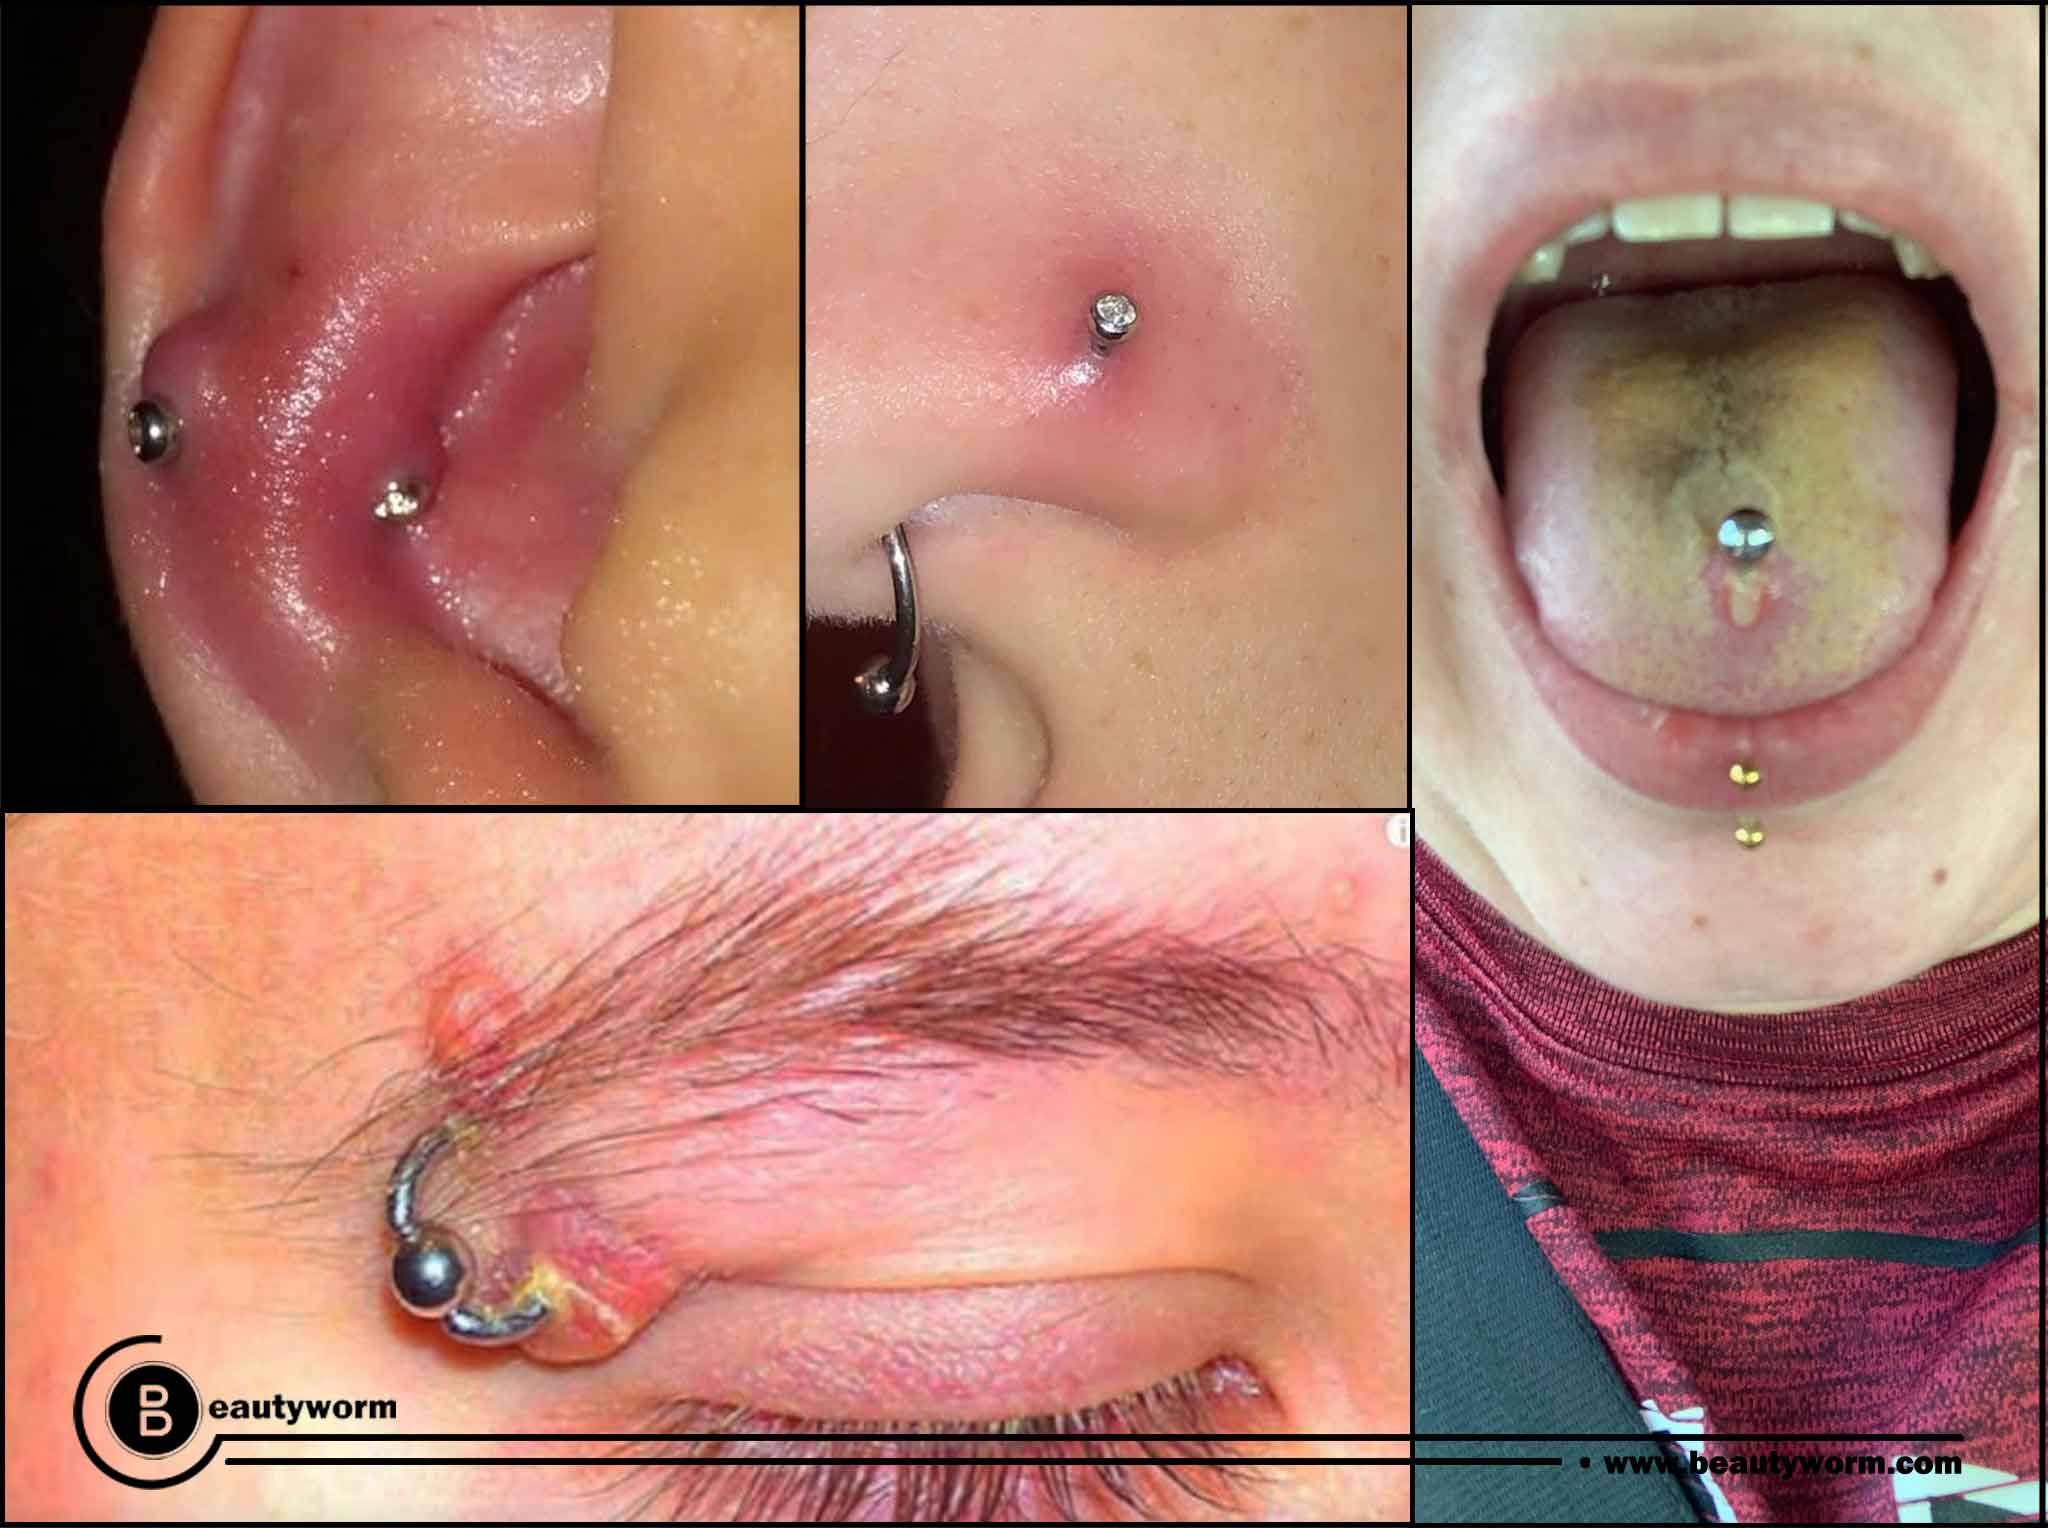 Piercing risks and infection